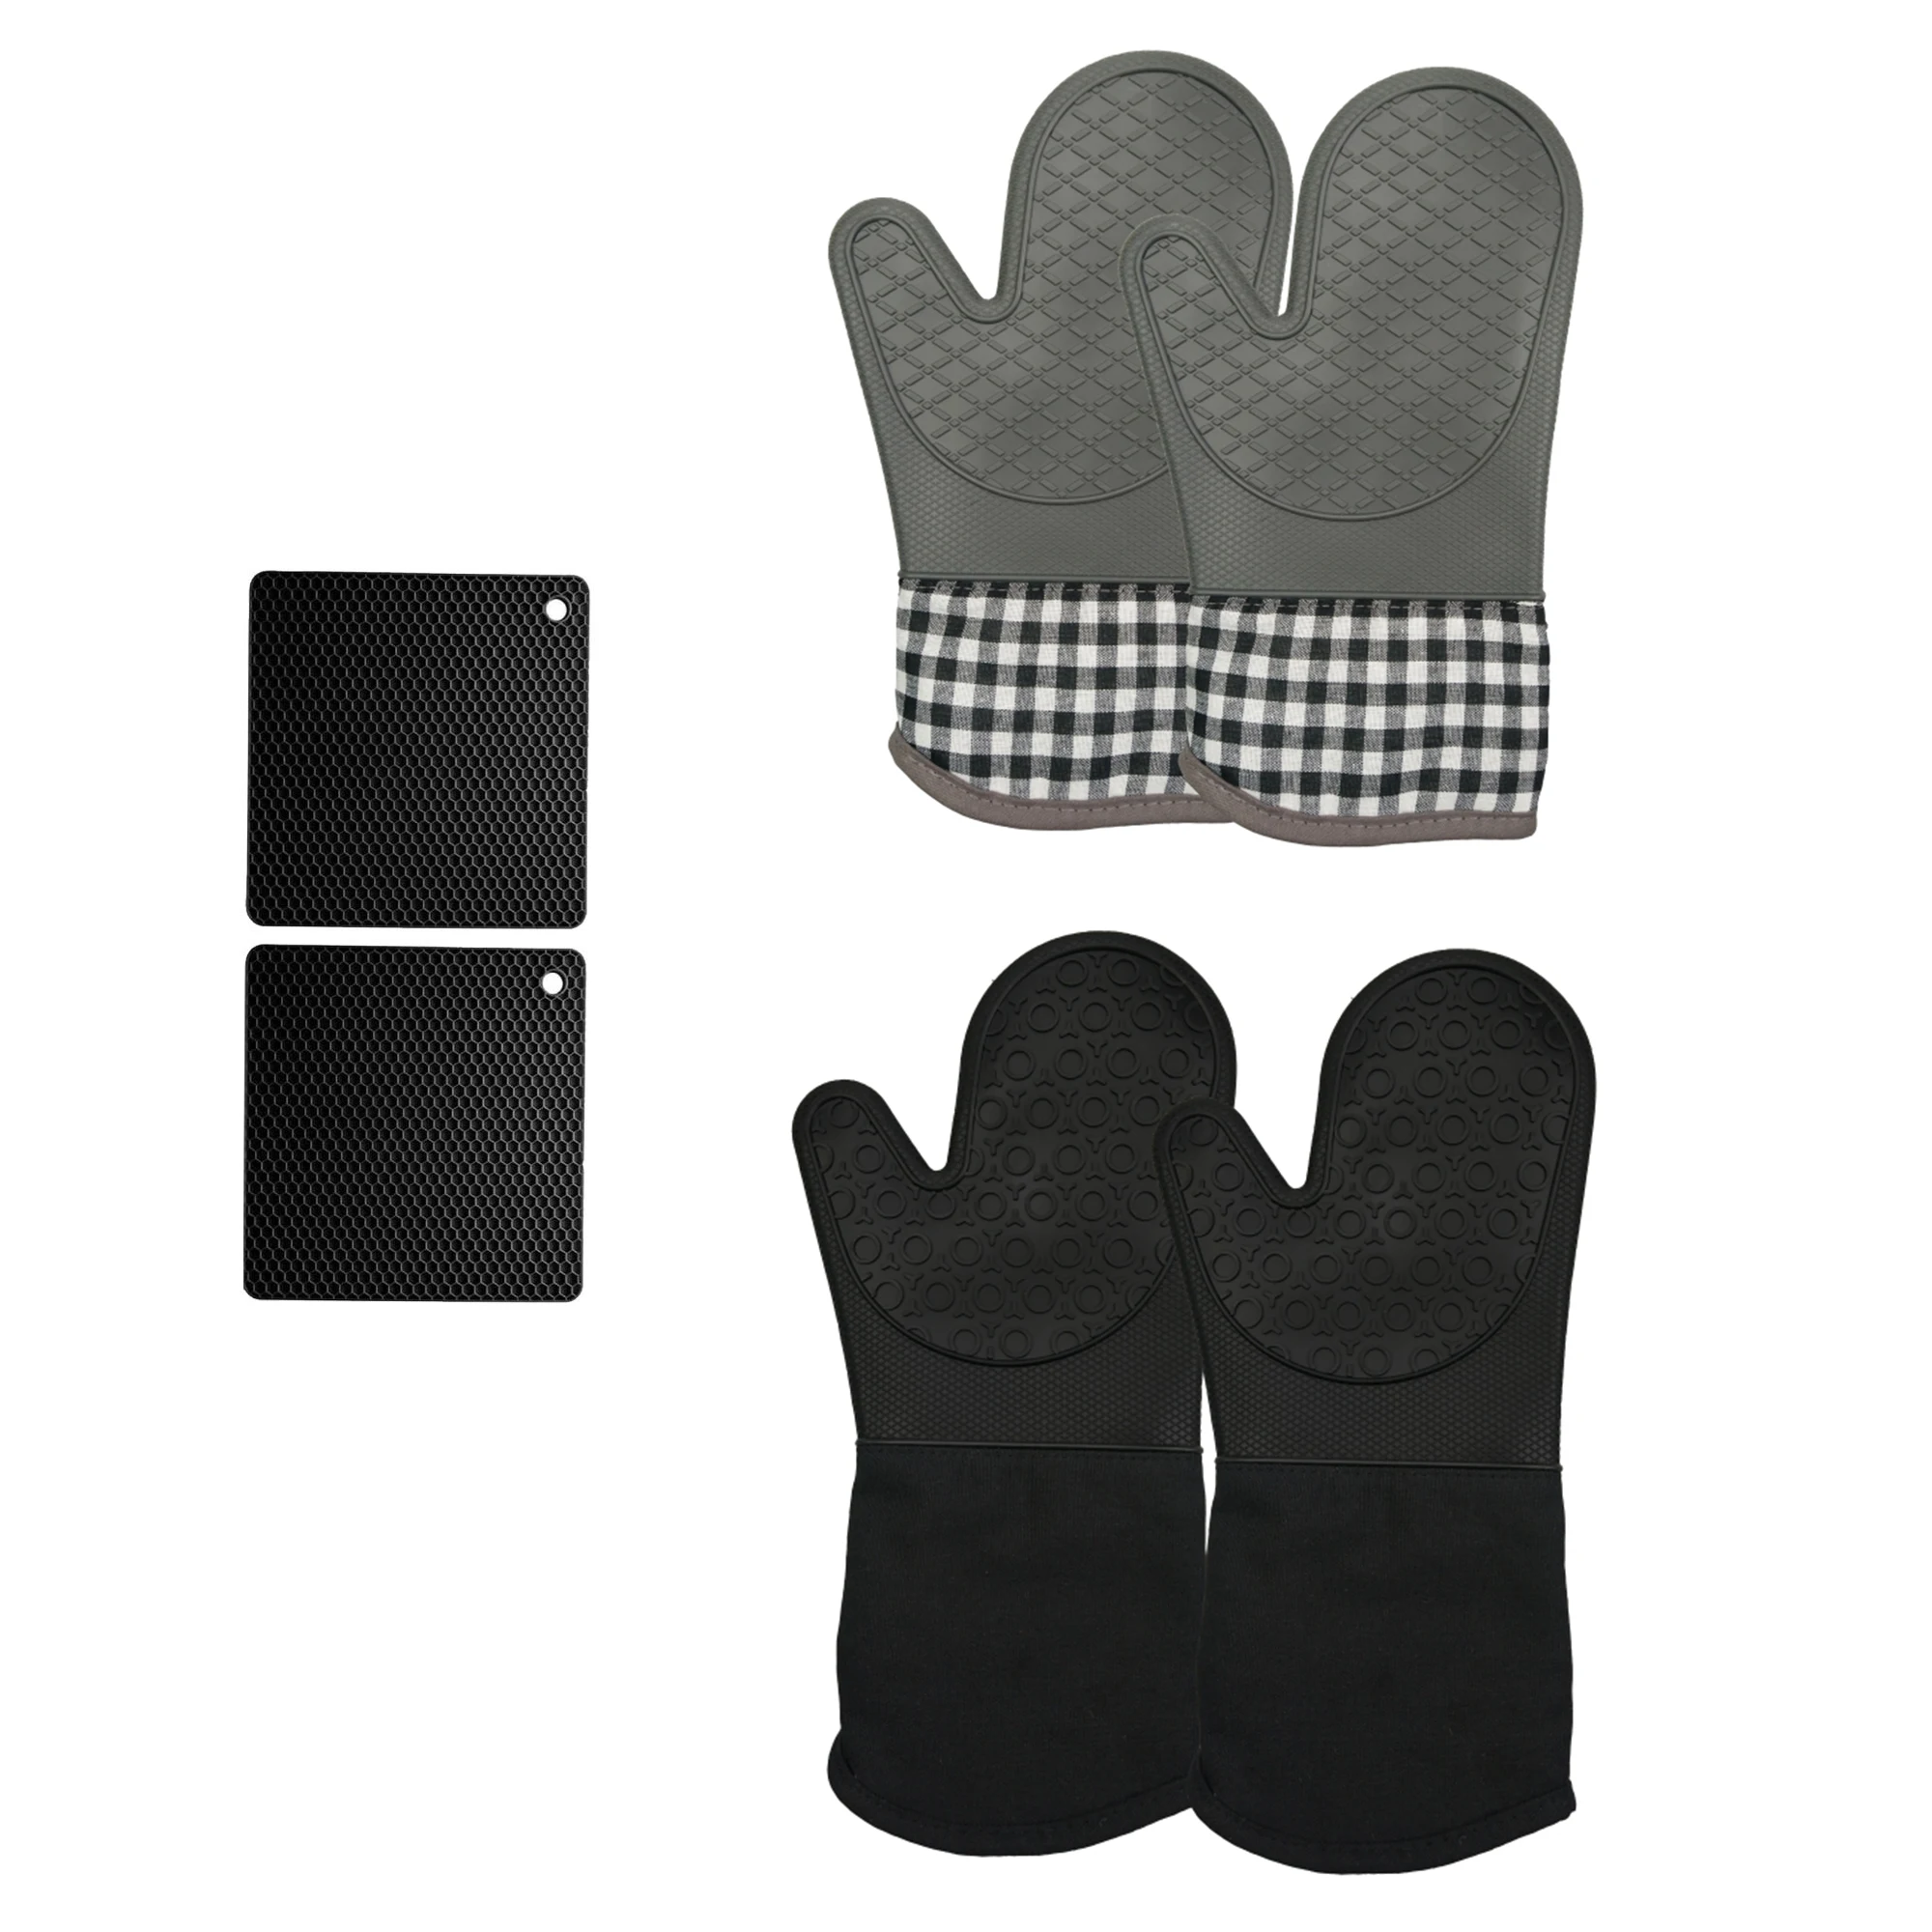 

Heat Resistant Baking Glove & Pot Holder Set - Food Grade Silicone Oven Mitt - Baking Cooking Grill BBQ - BPA Free